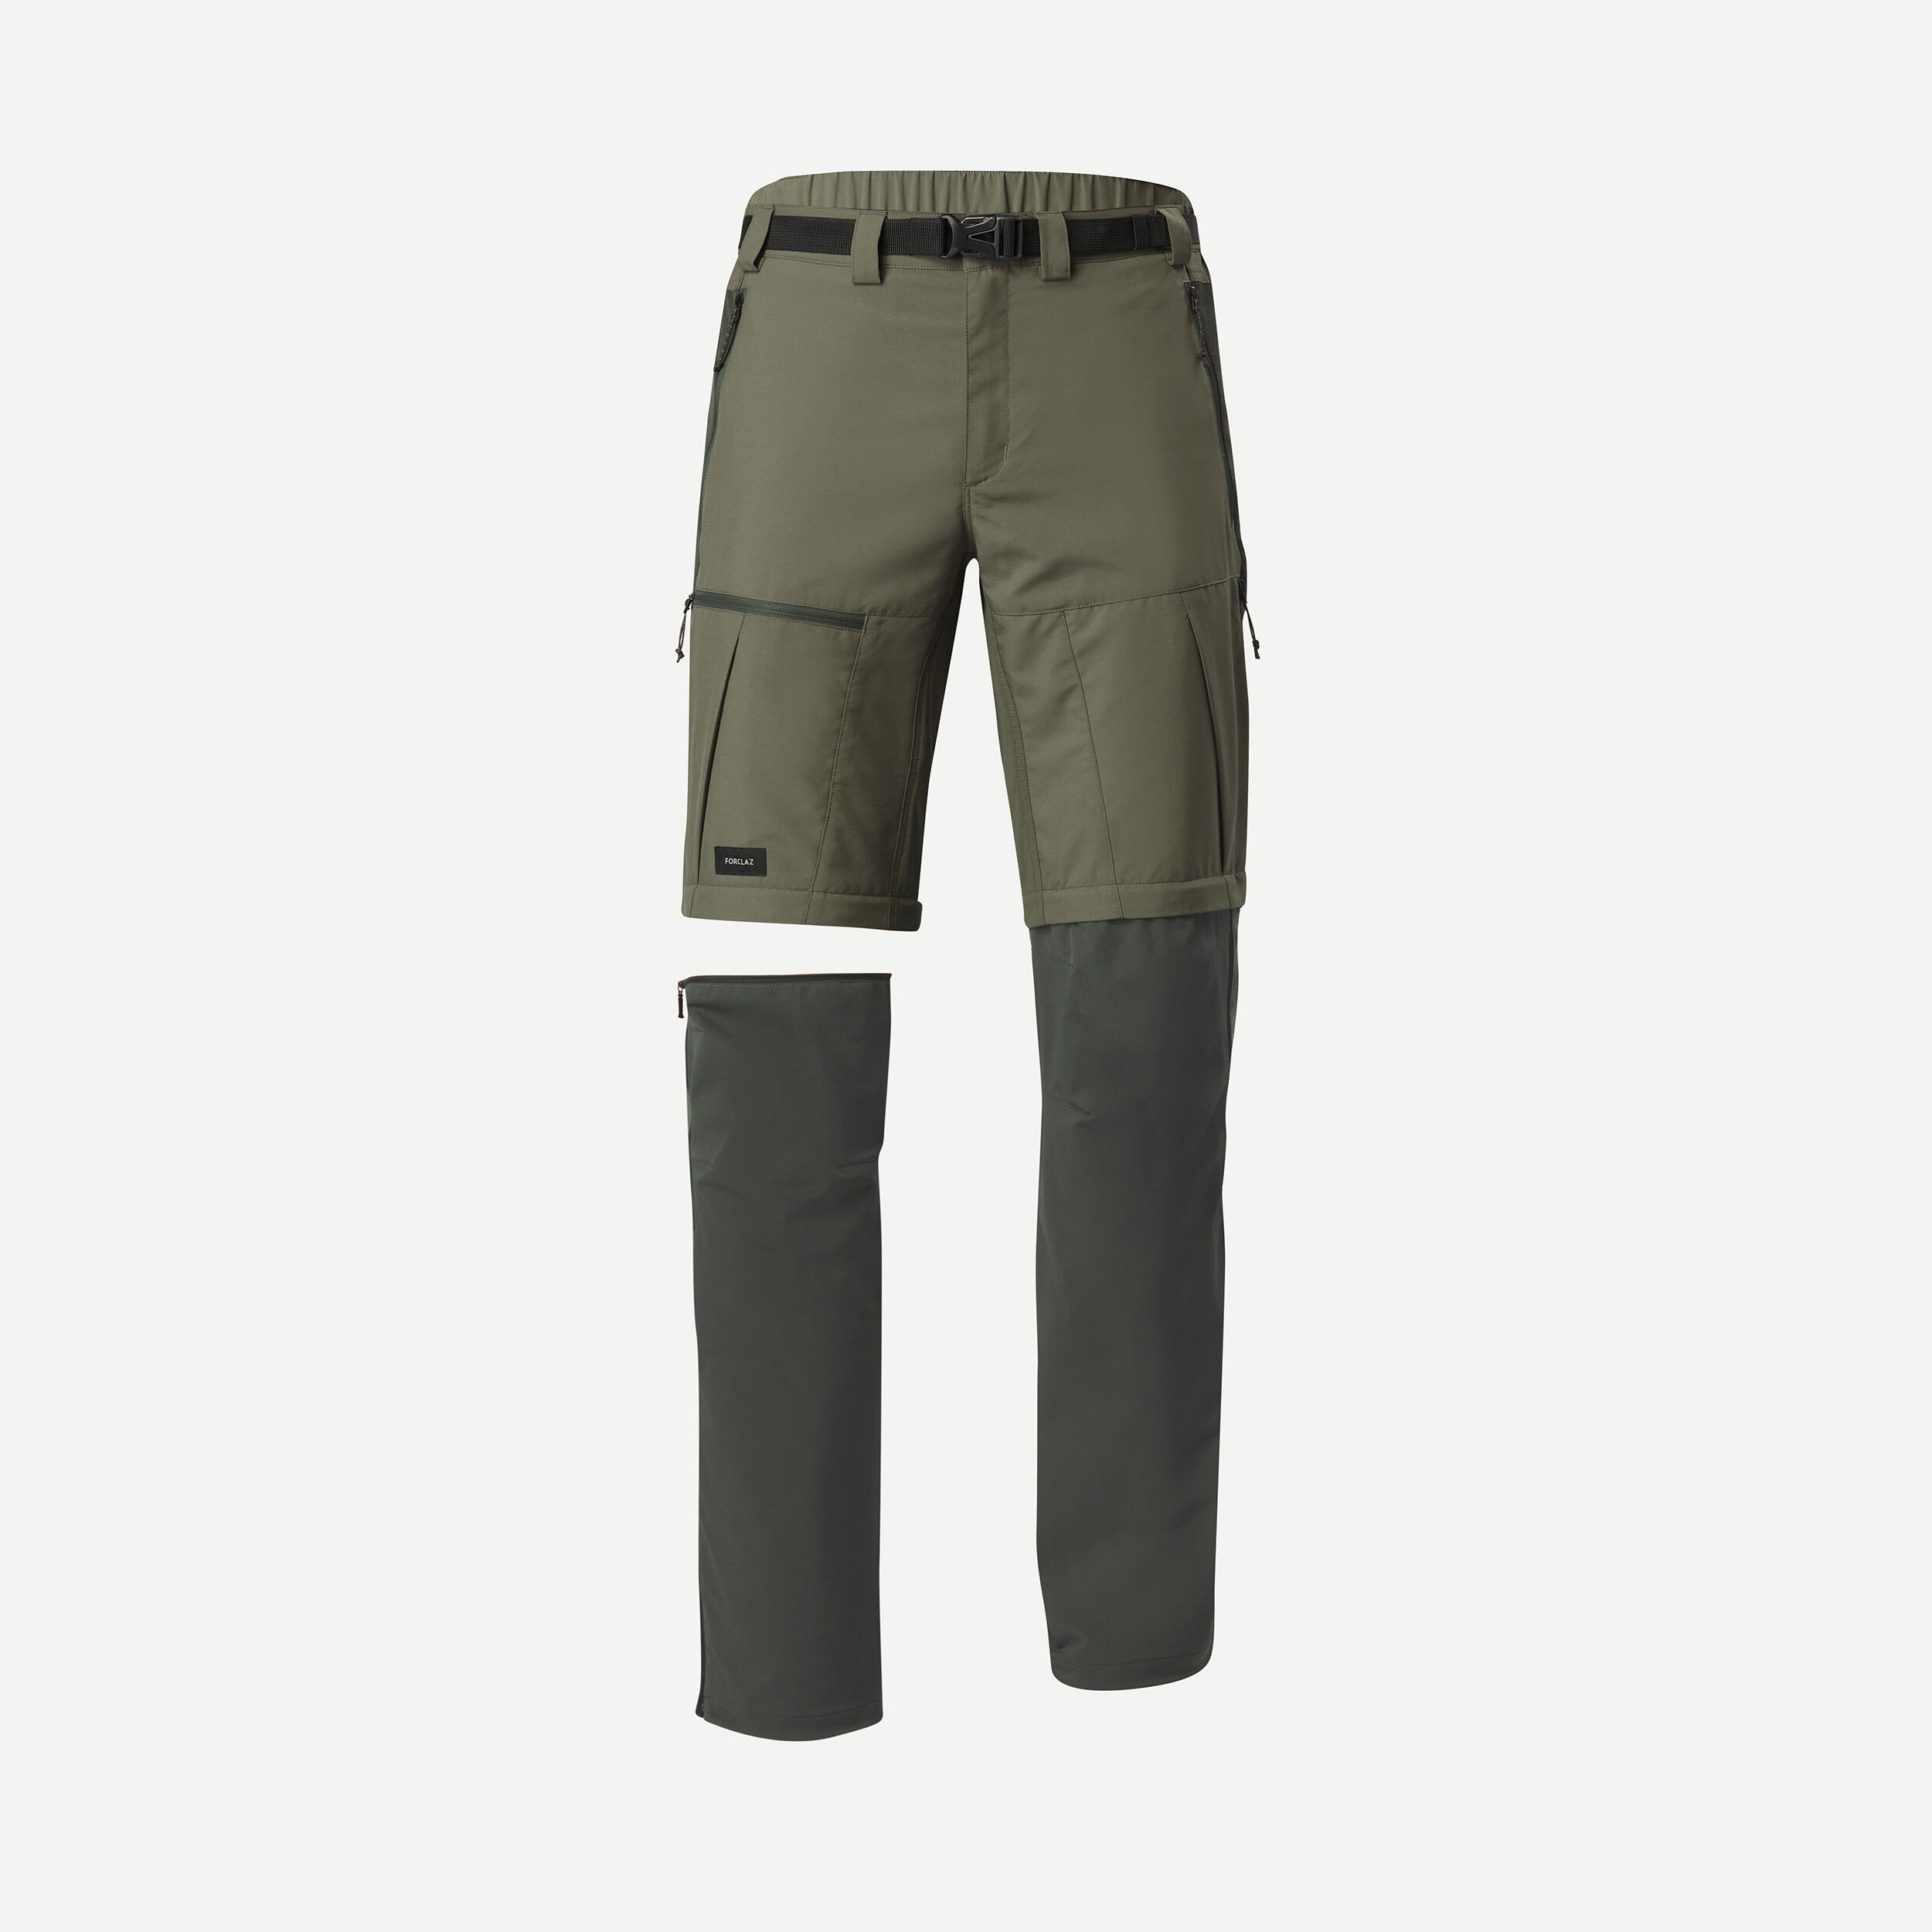 Men's 2-in-1 adjustable and robust hiking trousers – MT500 1/10